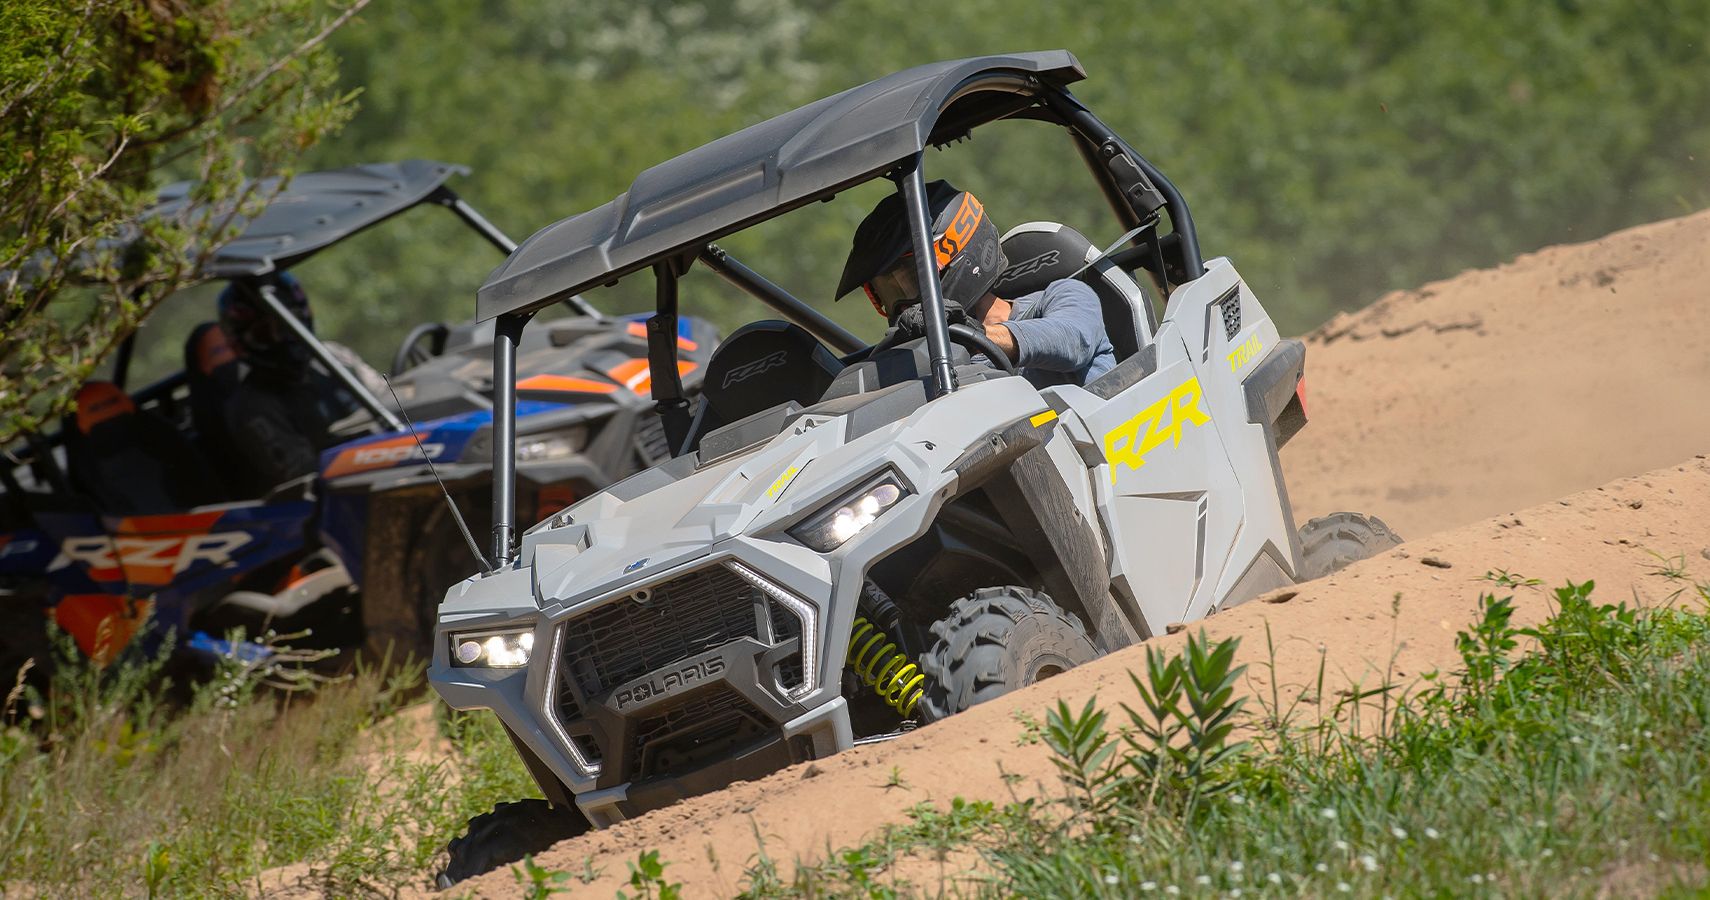 Review Polaris Adds Agility To The RZR With New Trail And 200 EFI Models